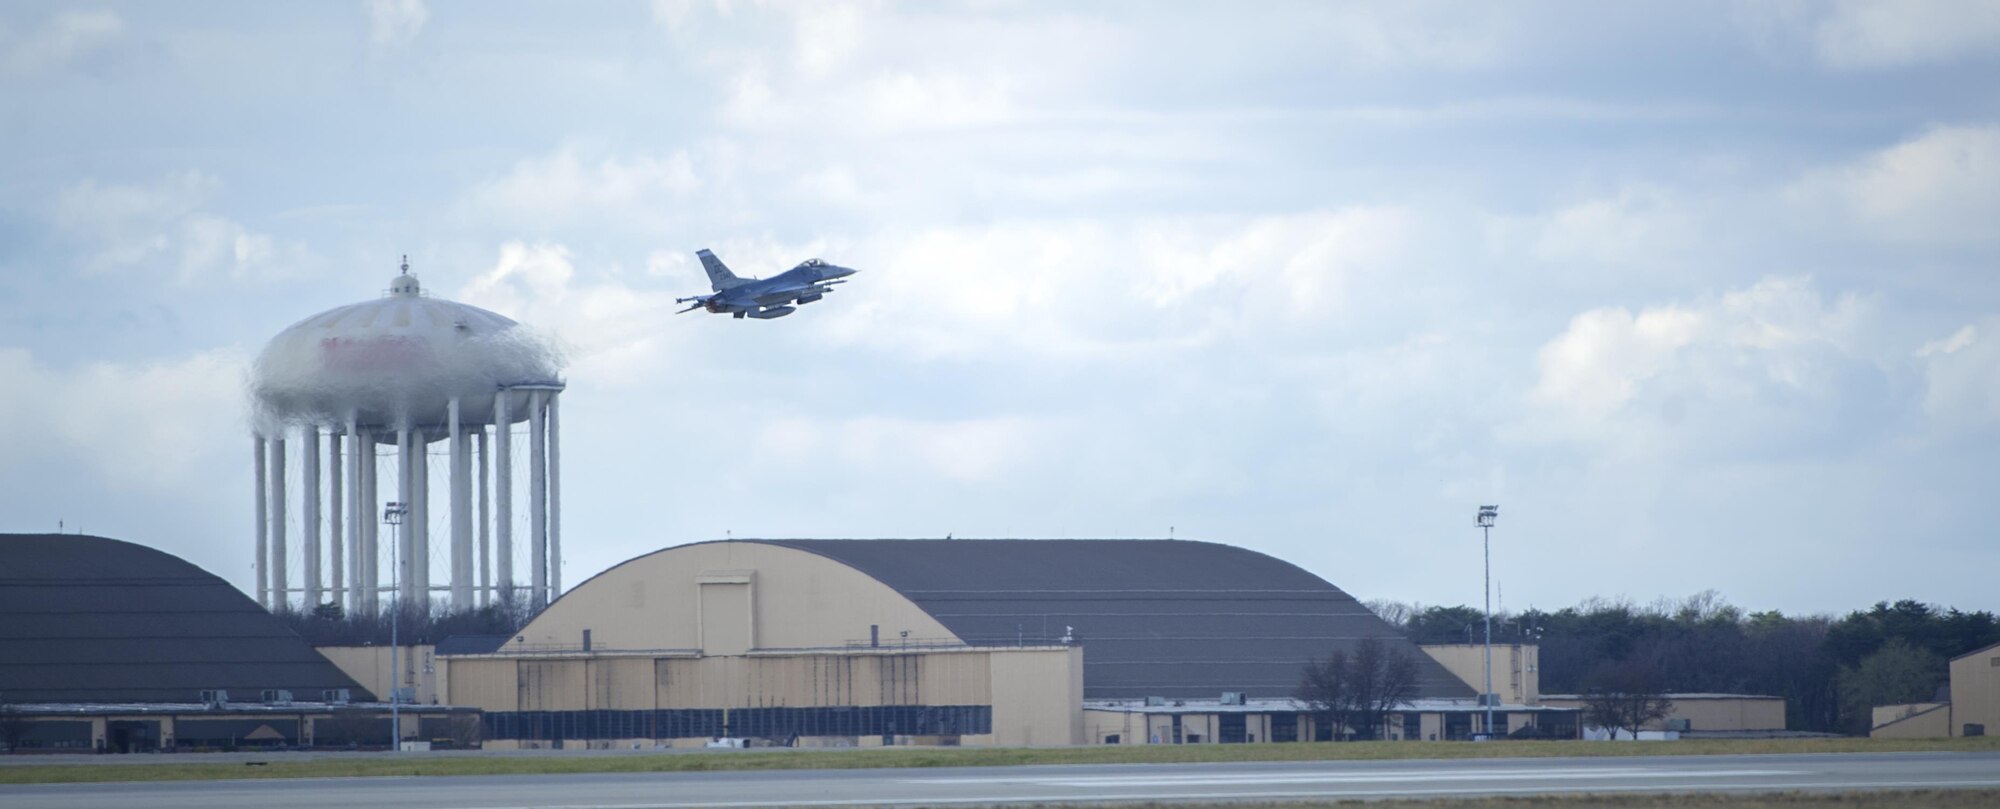 An F-16 Fighting Falcon takes off during an Aerospace Control Alert scramble at Joint Base Andrews, Md., March 28, 2017. A scramble is a rapid response to any air defense operation and air emergency. The 113th Aerospace Control Alert facility has more than double the number of alert events than all other active duty and National Guard bases combined. (U.S. Air Force photo by Airman 1st Class Gabrielle Spalding)